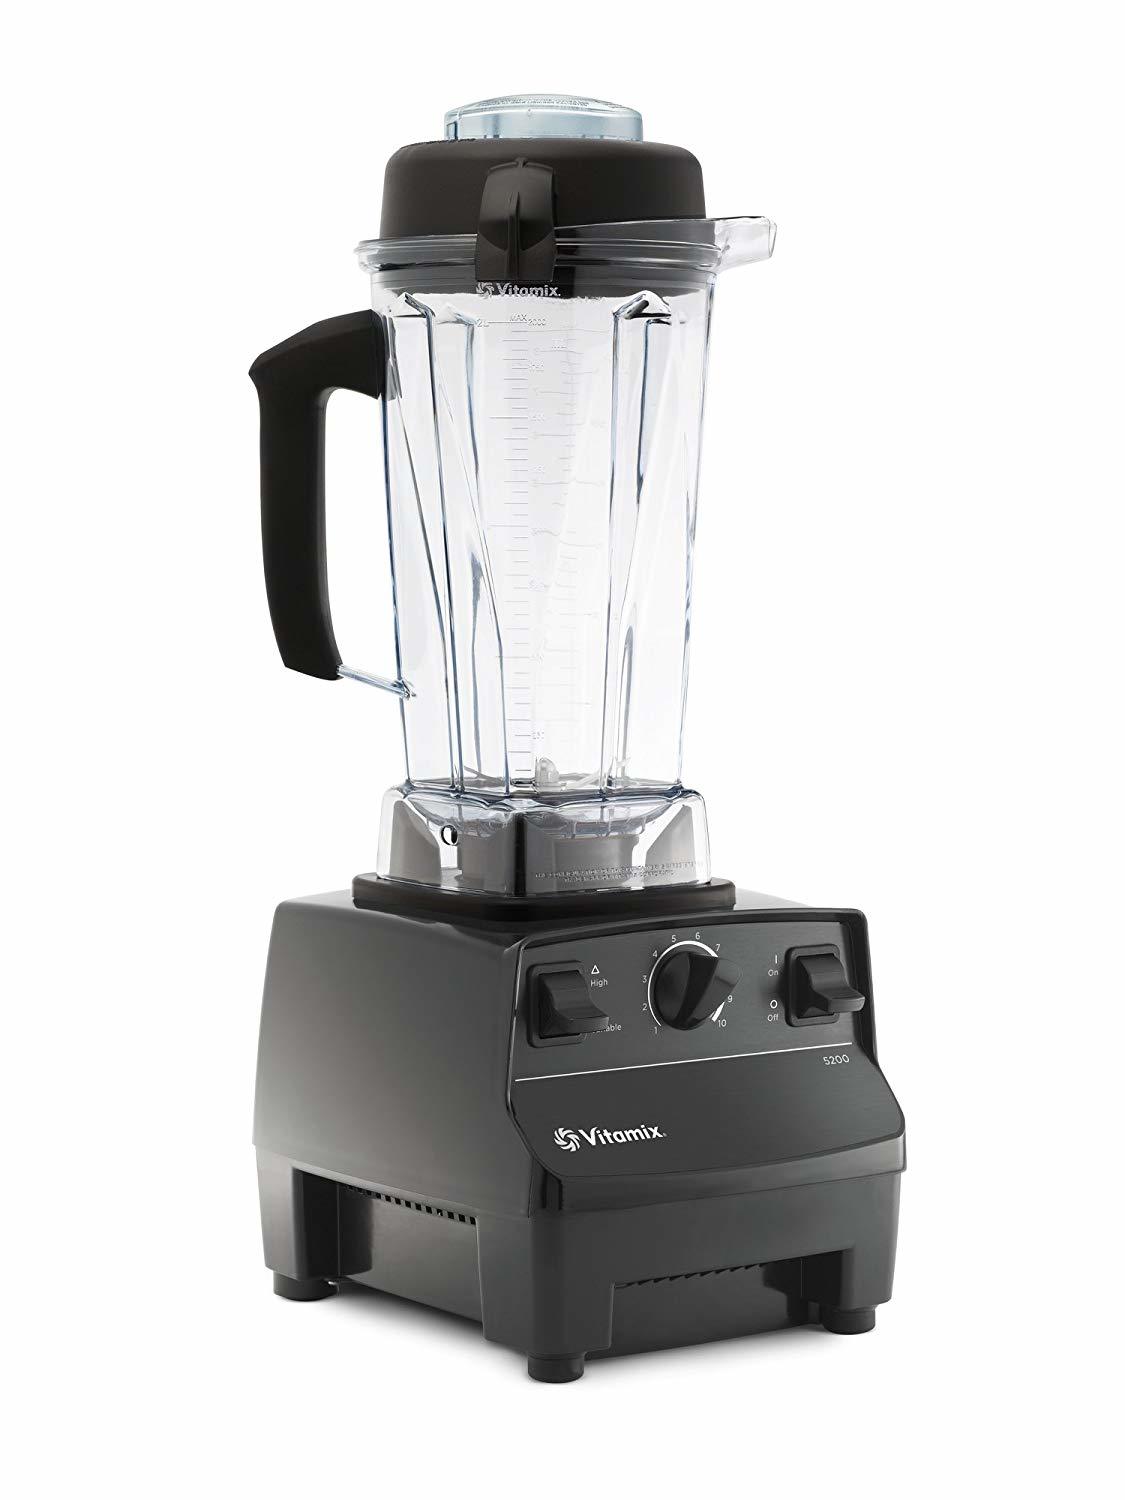 Today Only: Save On Vitamix Blenders After Black Friday Savings!